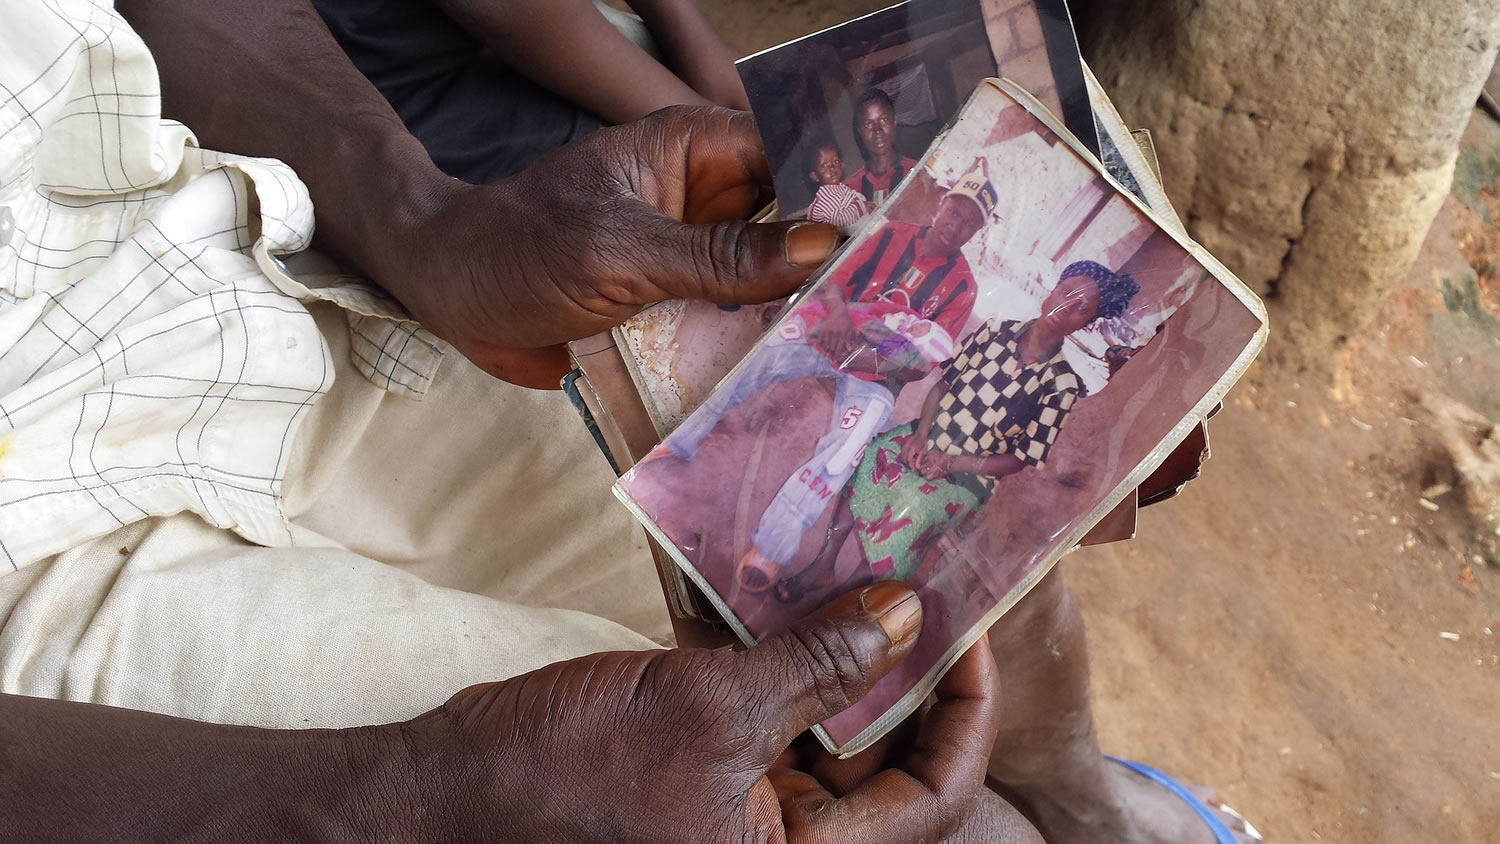 UNICEF
A person holds a family photo of newborn Emile Ouamouno, known as Patient Zero, and his mother and father. Two-year-old Emile, who lived in the forest village of Meliandou, Guinea, was the first known victim of the current Ebola outbreak.